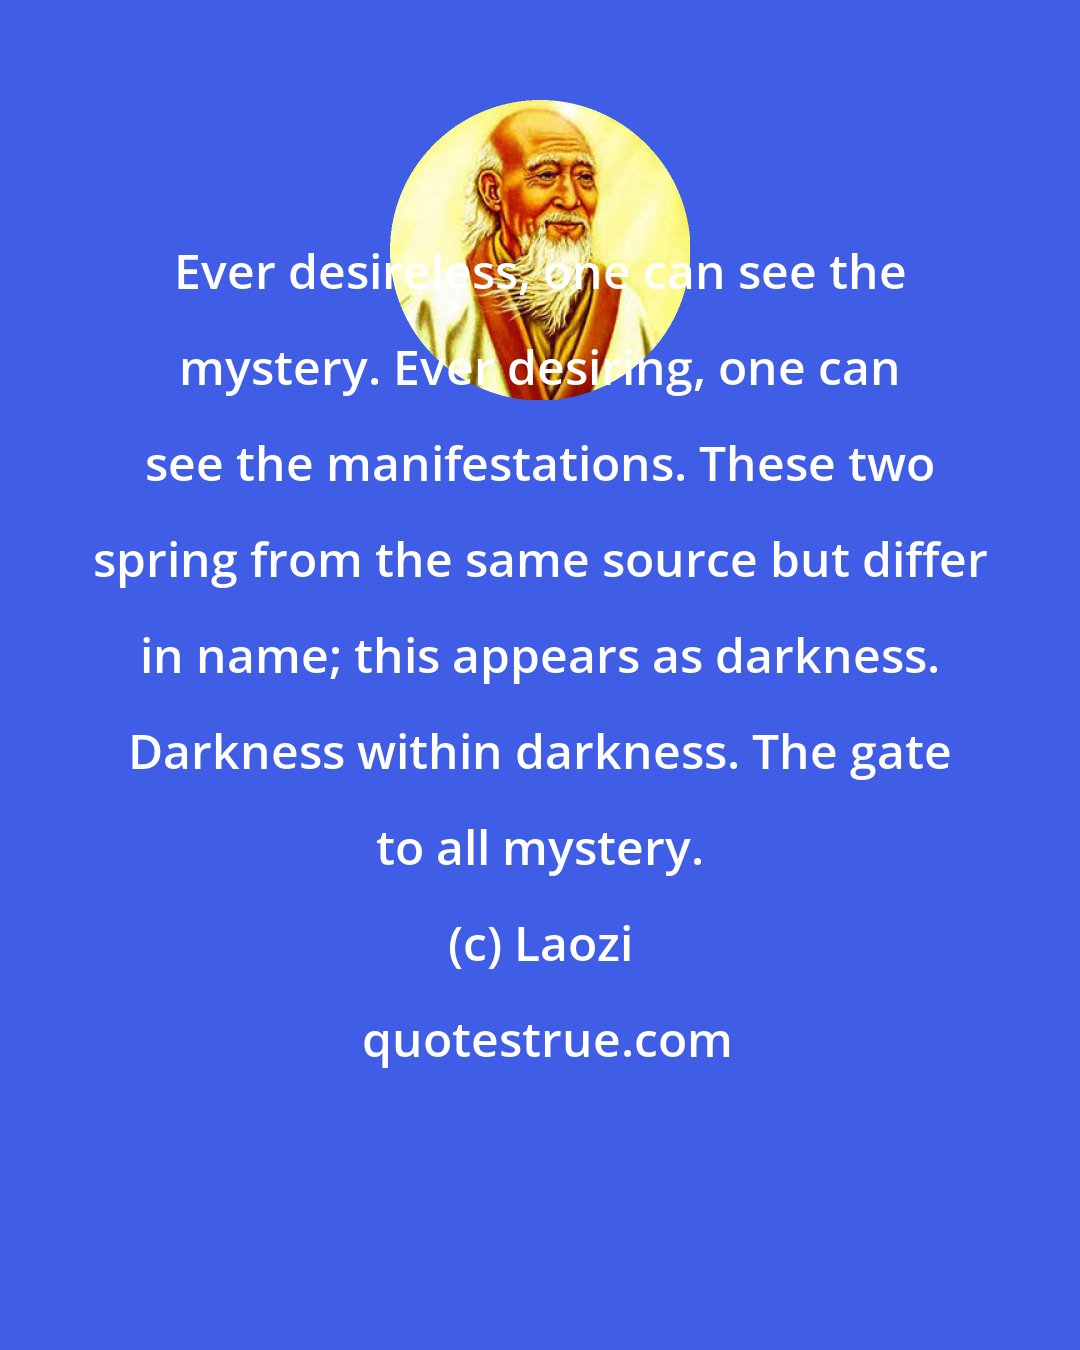 Laozi: Ever desireless, one can see the mystery. Ever desiring, one can see the manifestations. These two spring from the same source but differ in name; this appears as darkness. Darkness within darkness. The gate to all mystery.